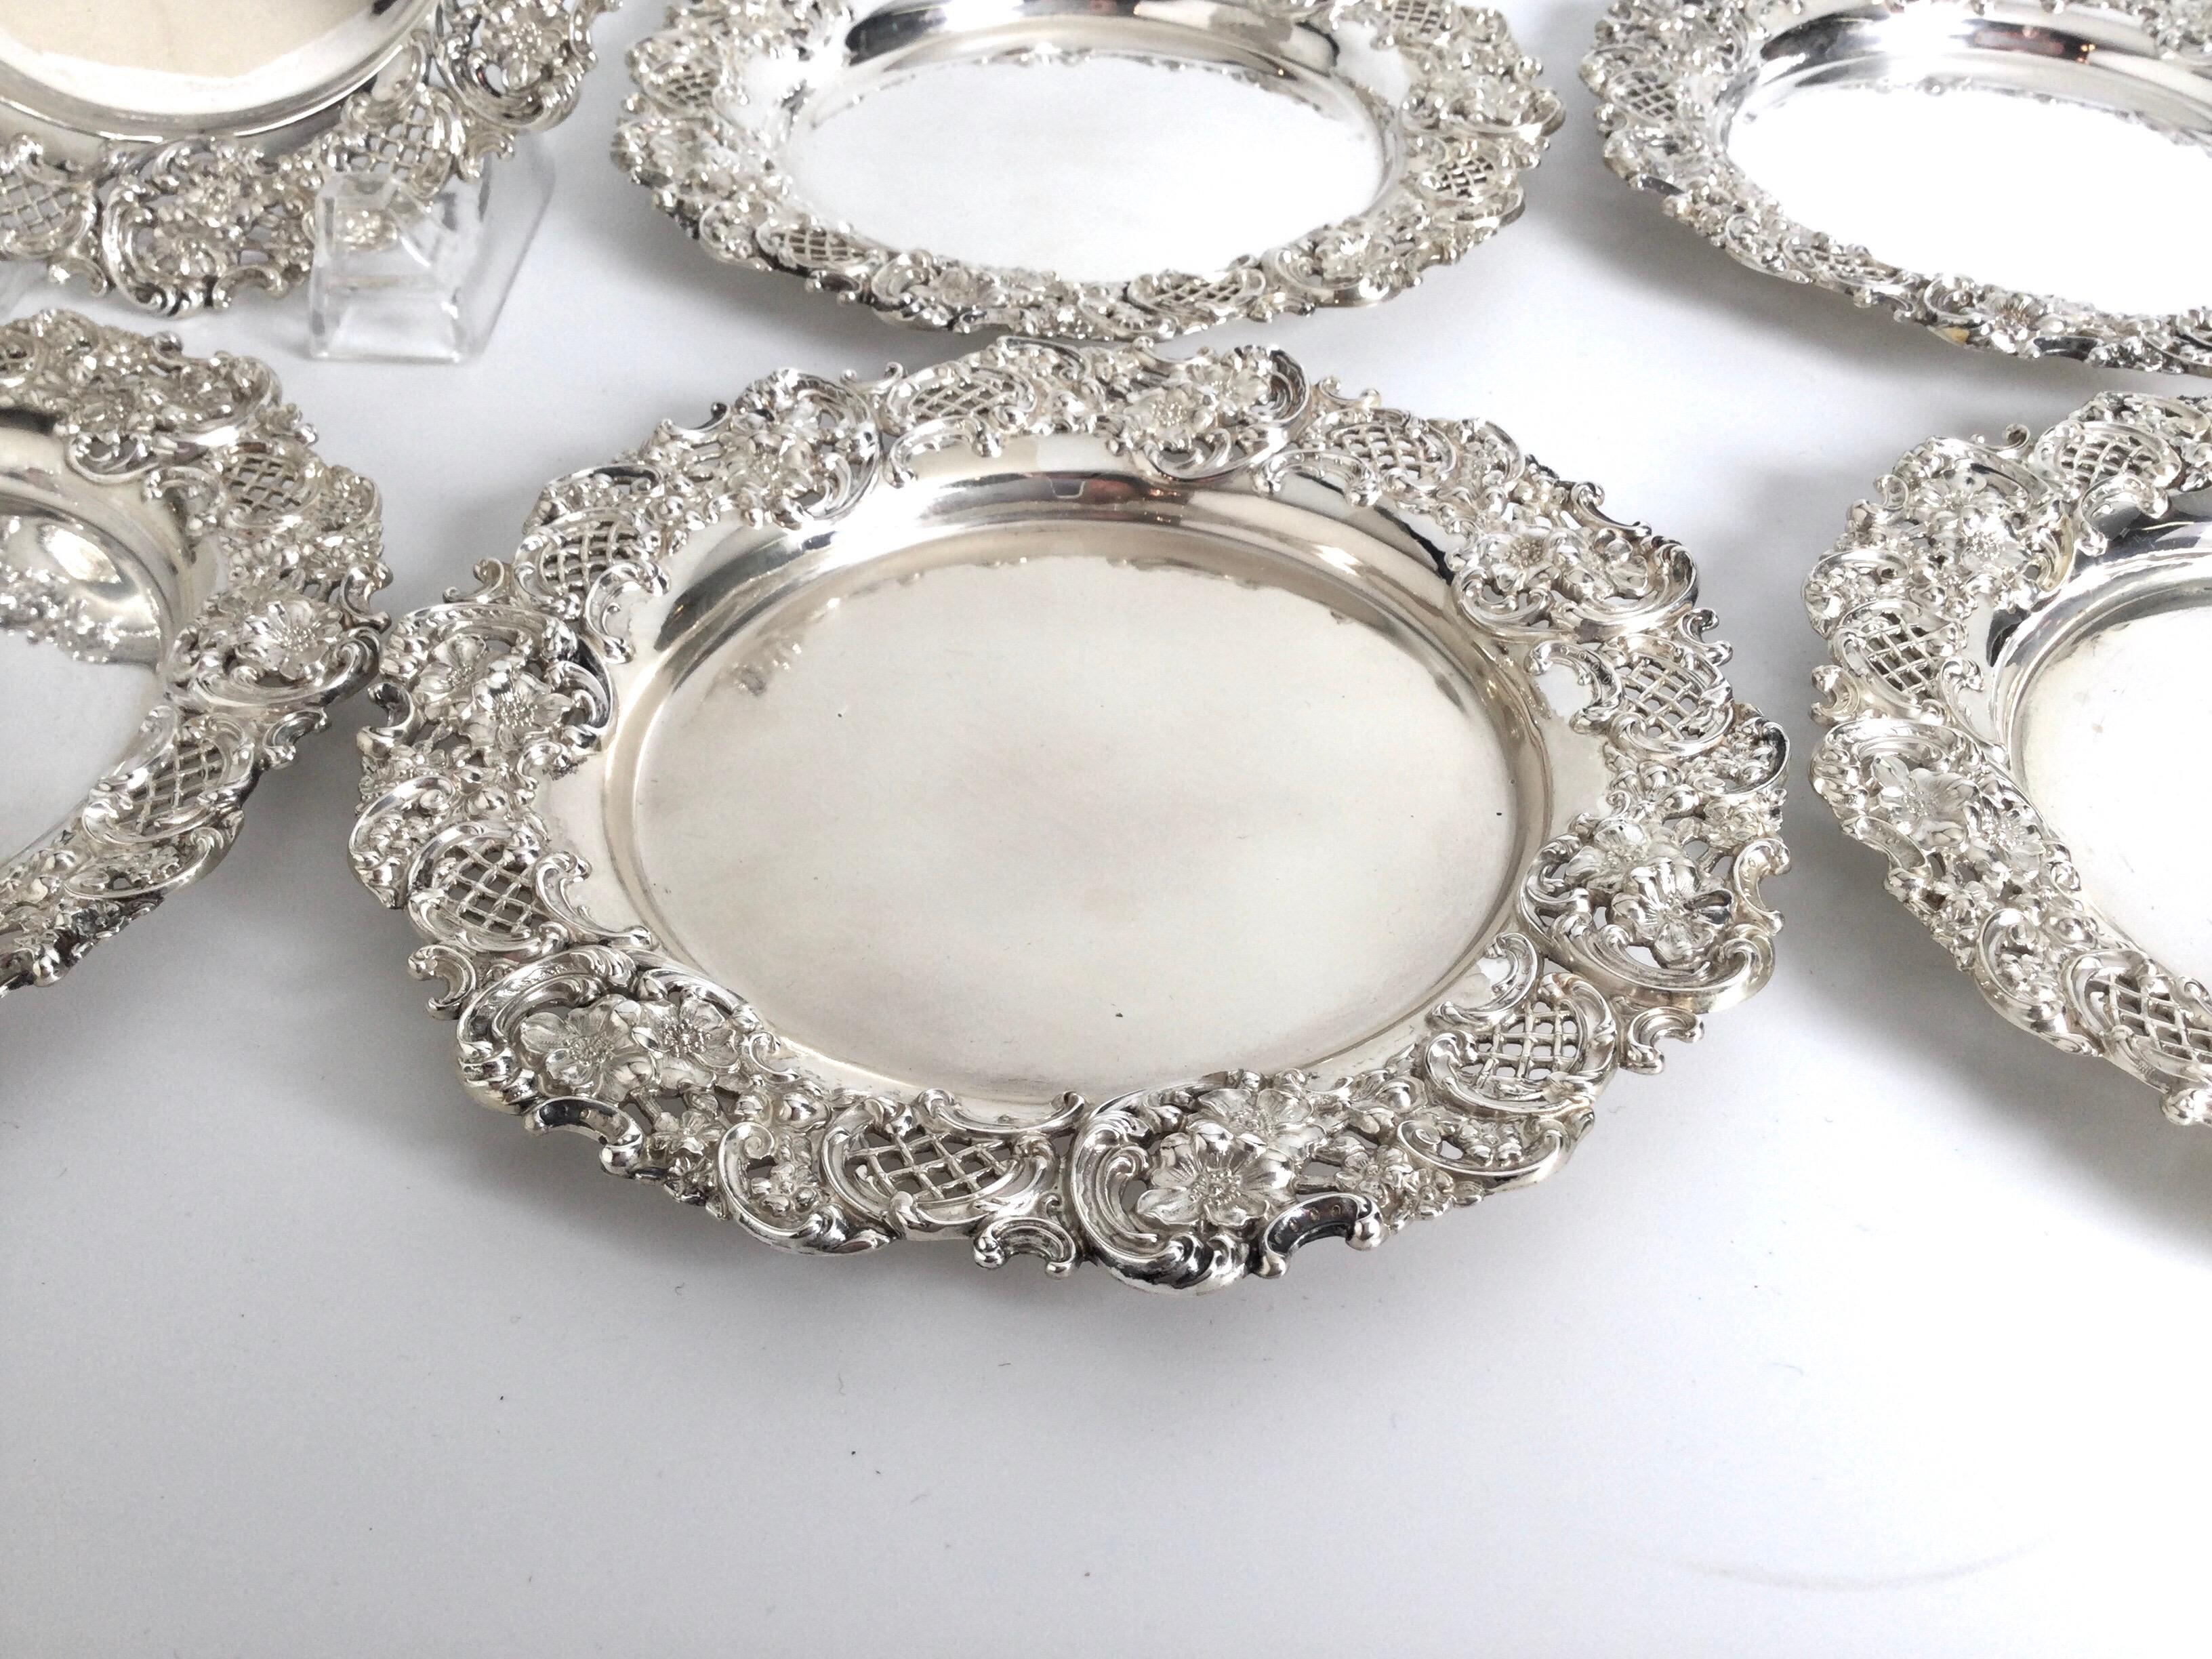 A set of 8 sterling silver reticulated 6.5 inch bread plates. The elaborate pierced borders retailed by J. E. Caldwell and attributed to Gorham. Good weight not stamped but cast.